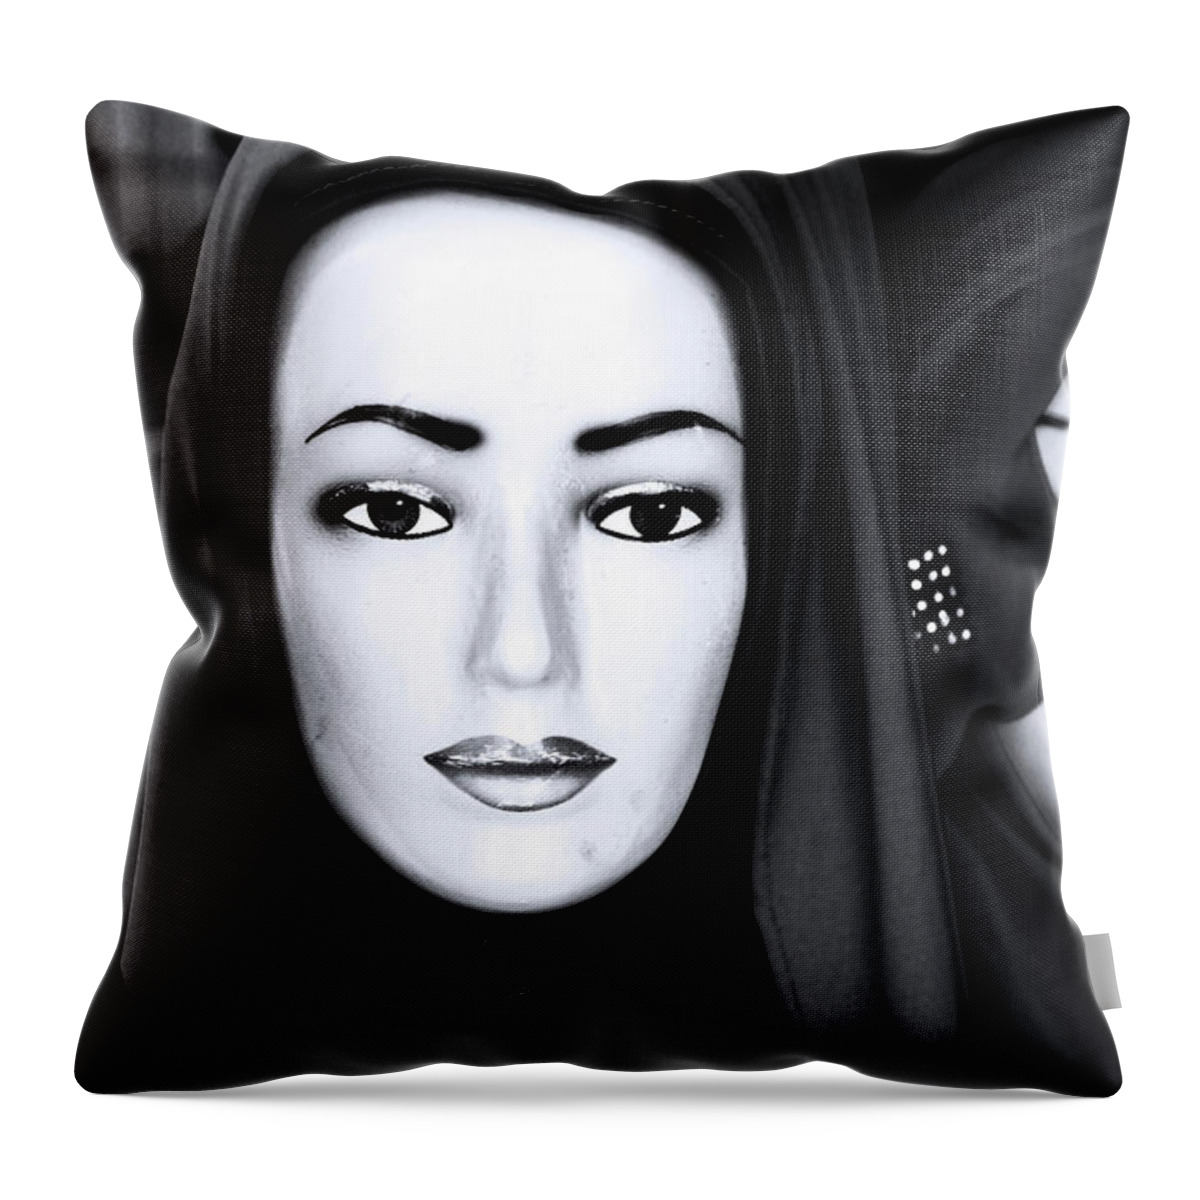 Asia Throw Pillow featuring the photograph Musquin by Jez C Self